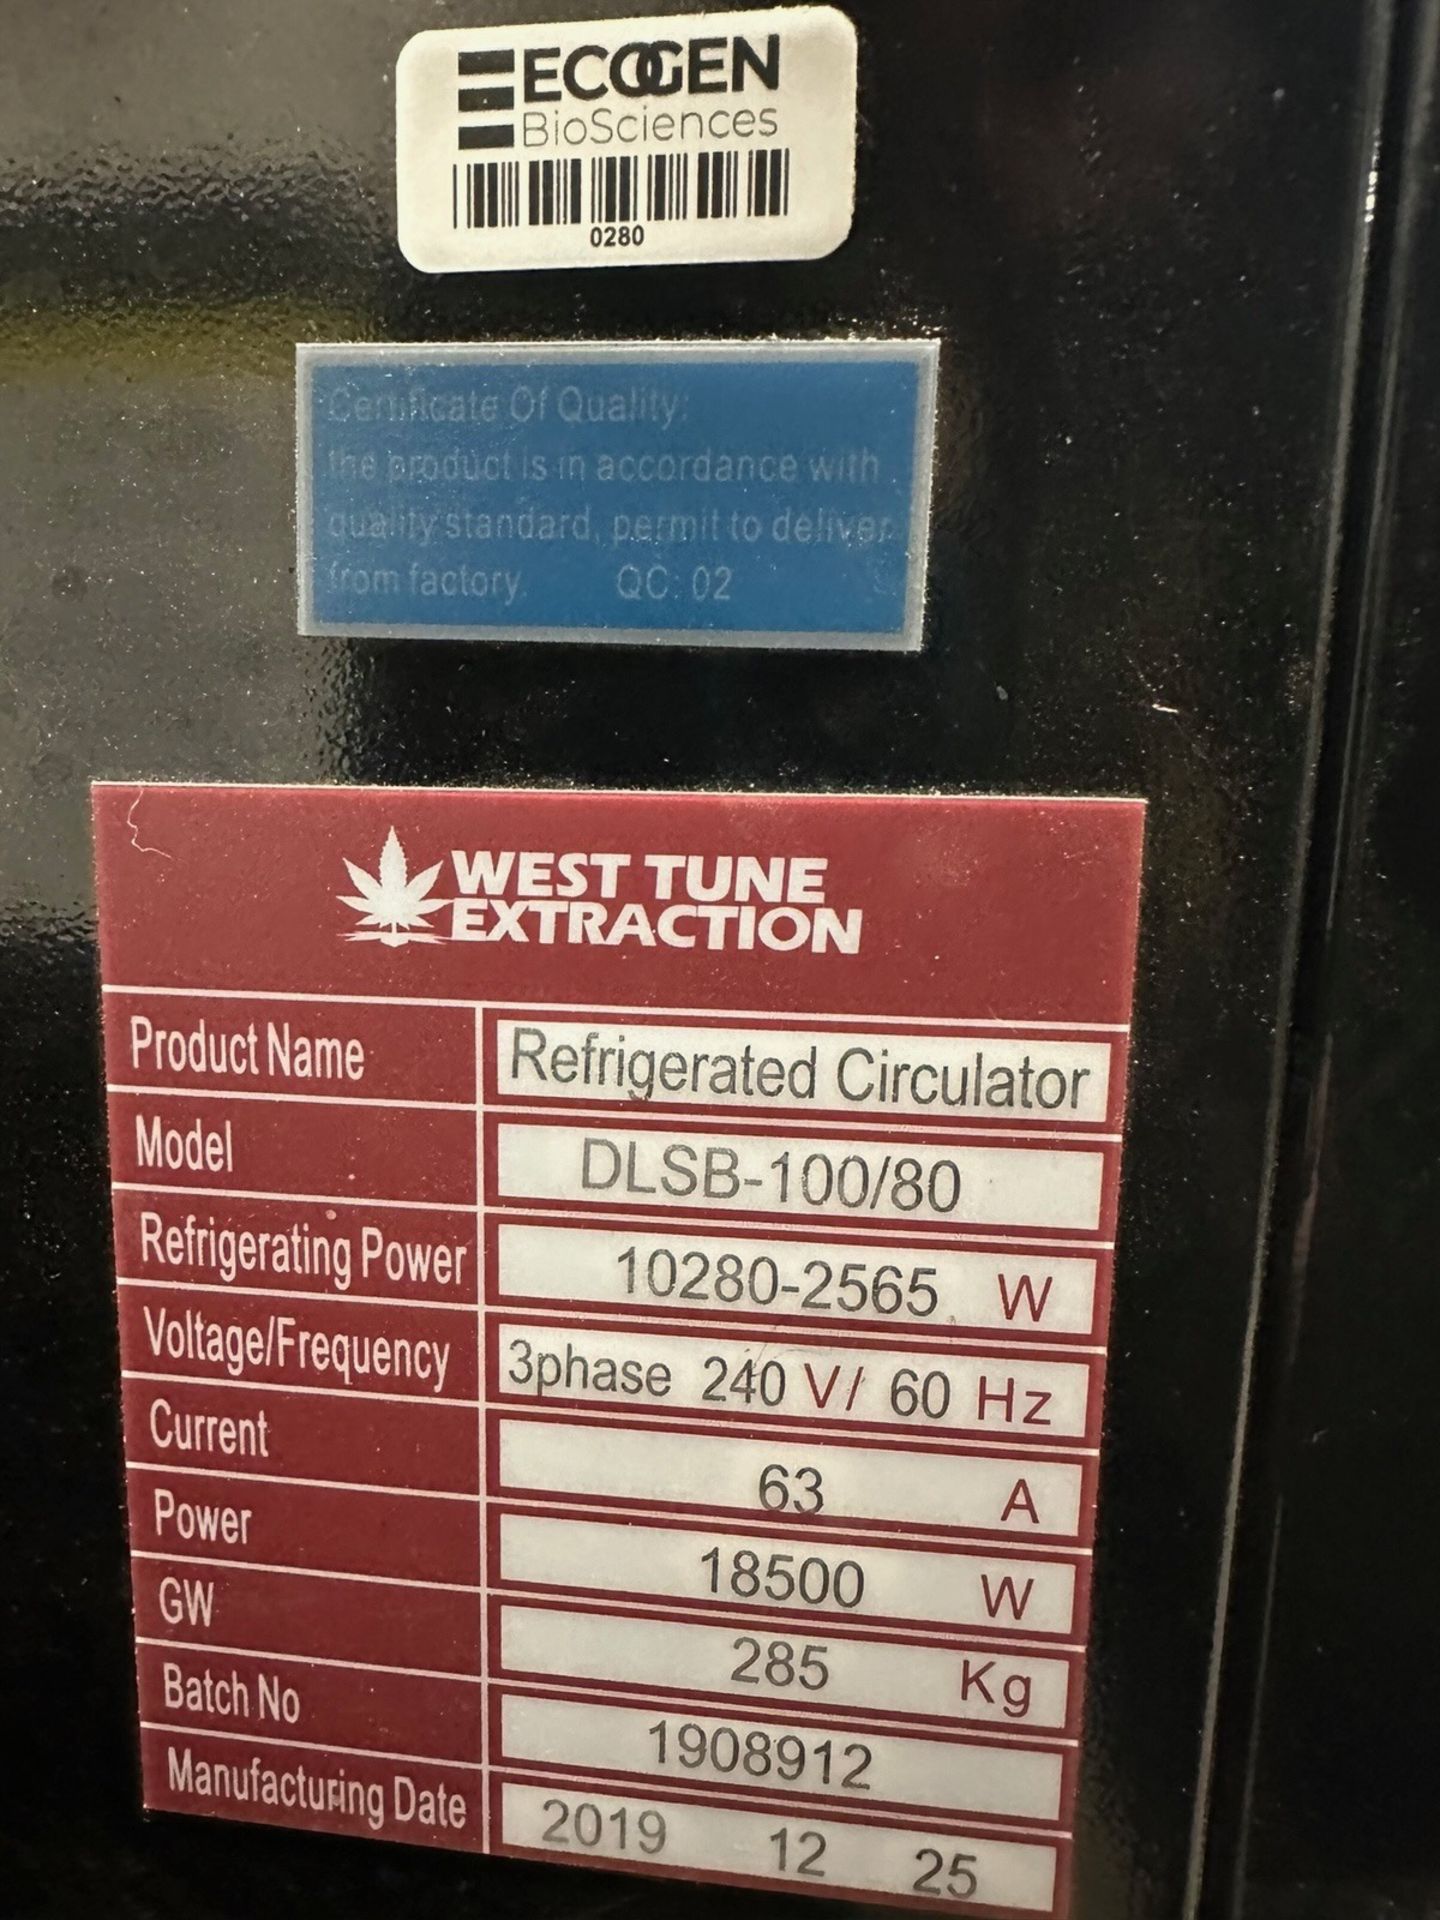 West Tune Extraction Refrigerated Circulator, Model, DLSB-100/80 Year 201 | Rig Fee $200 - Image 8 of 8